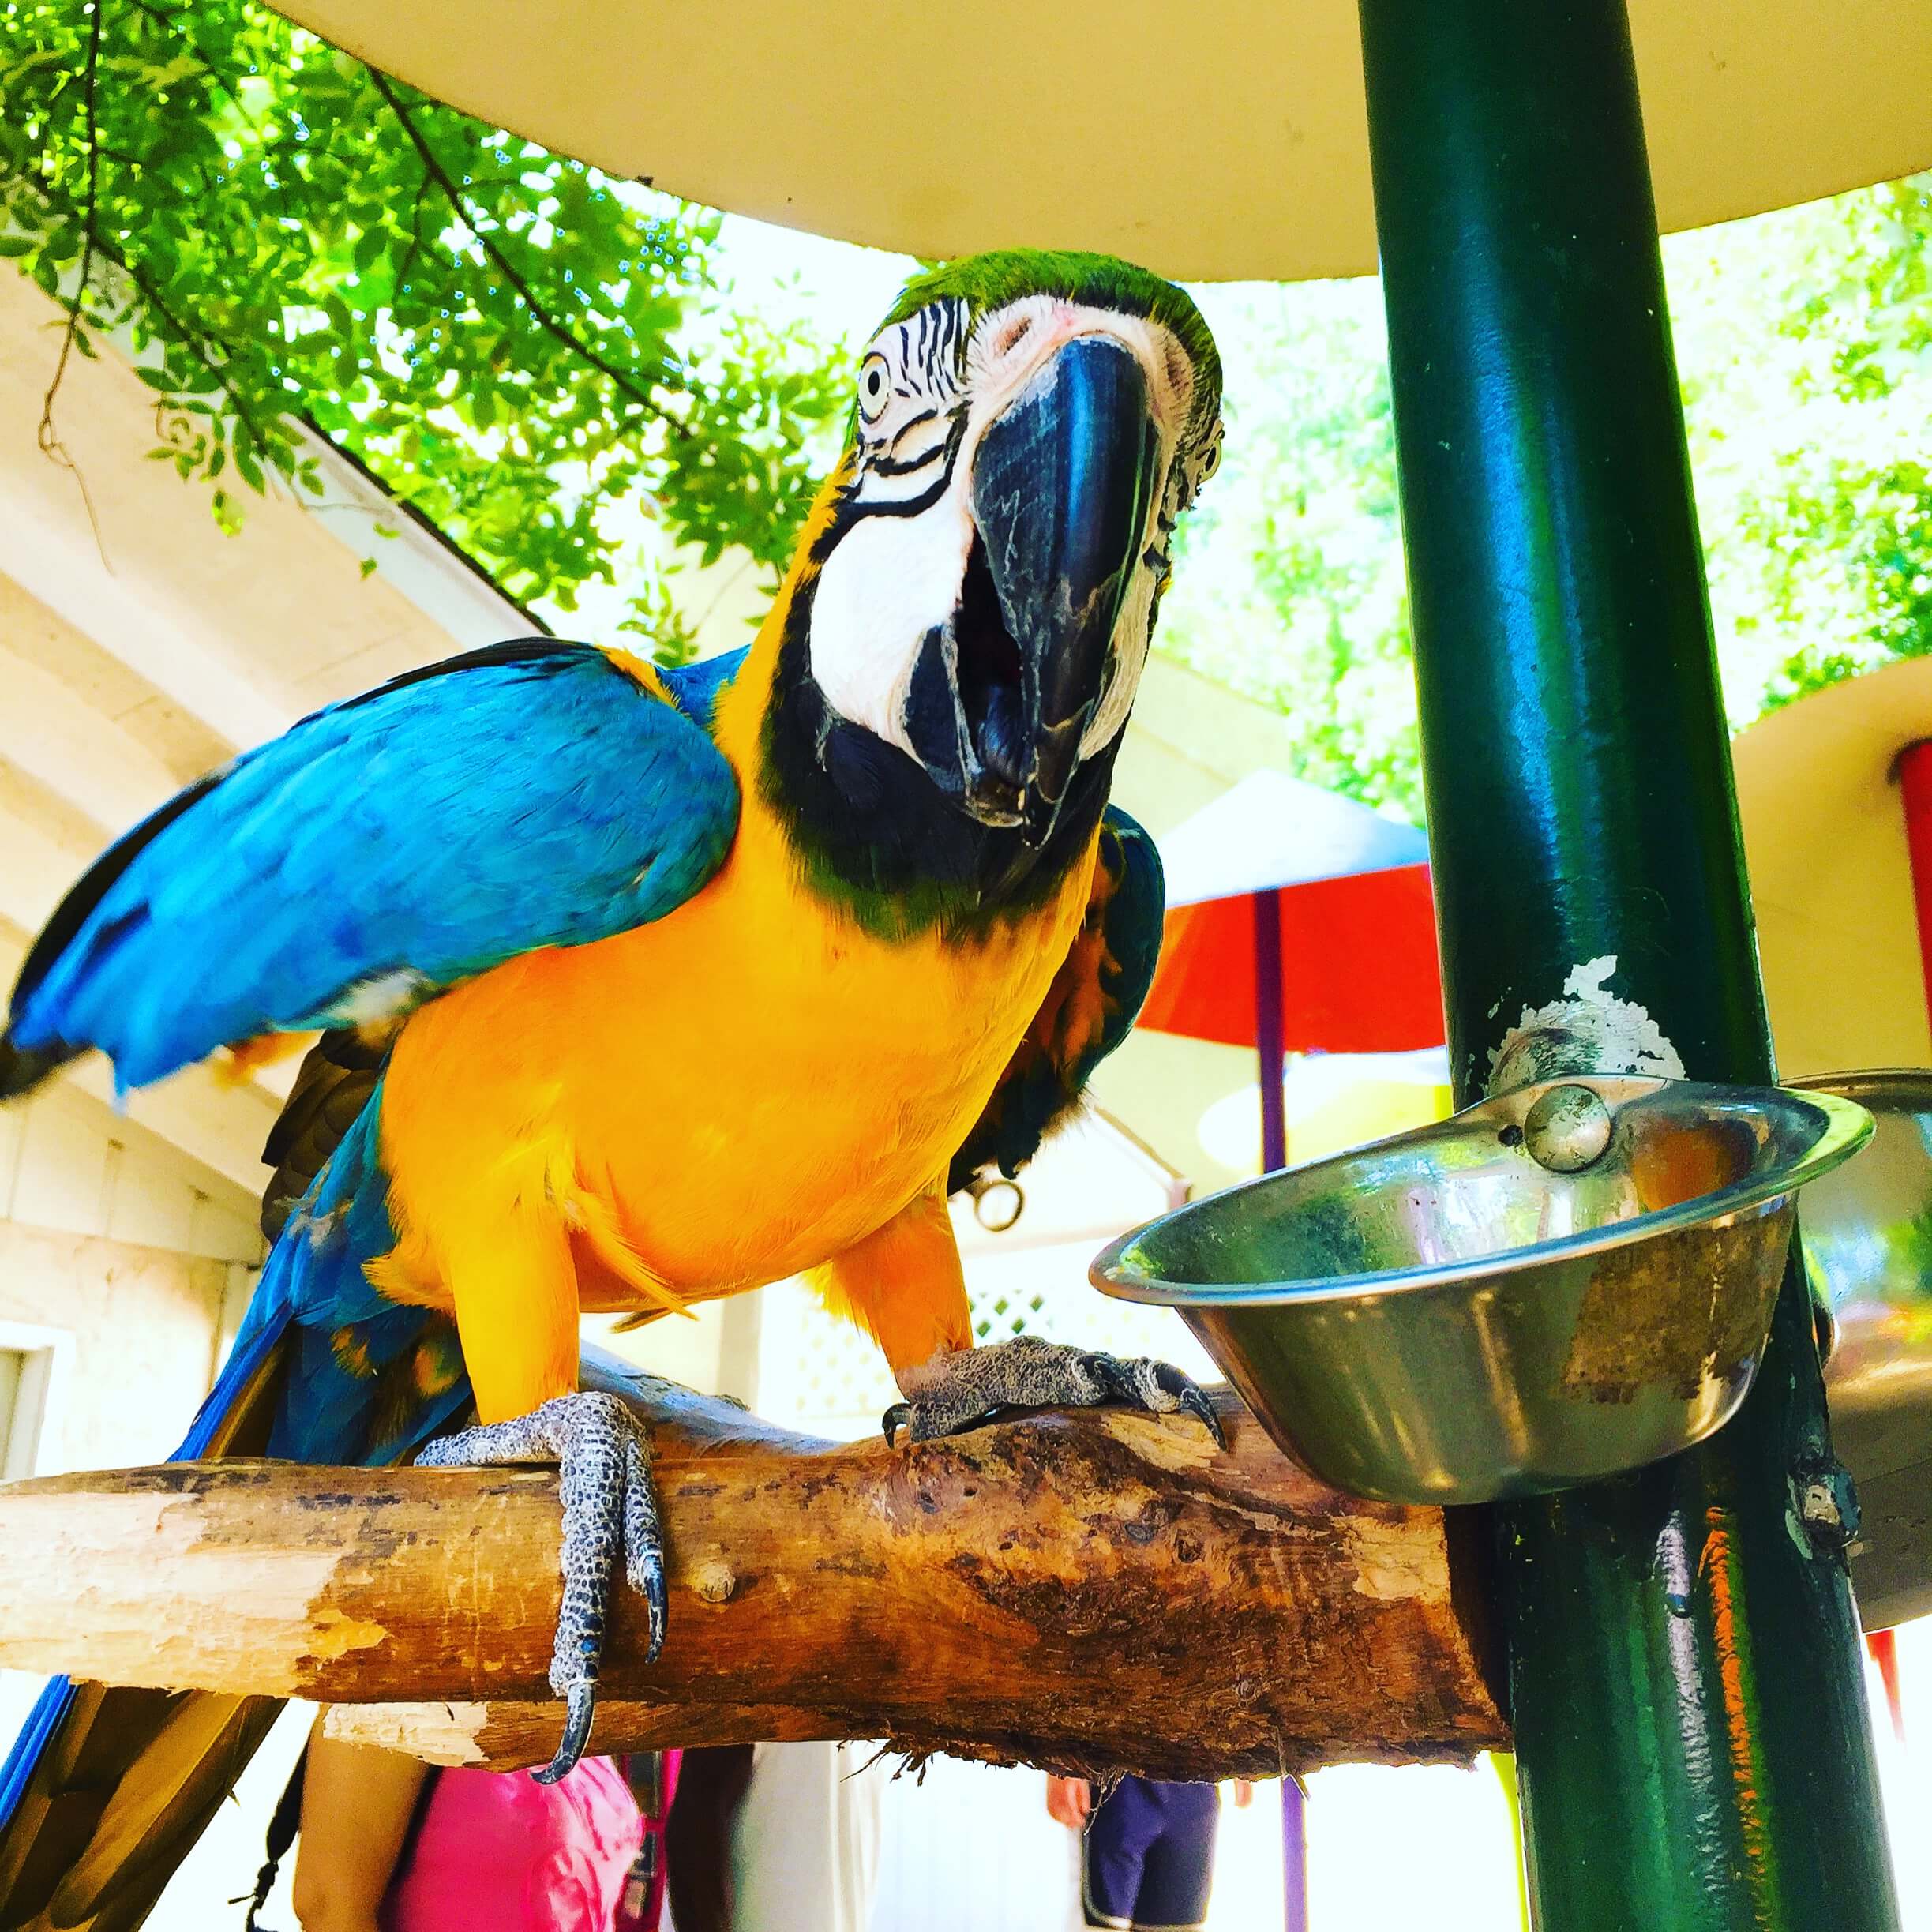 A parrot is squaking toward the camera with a food bowl beside it.